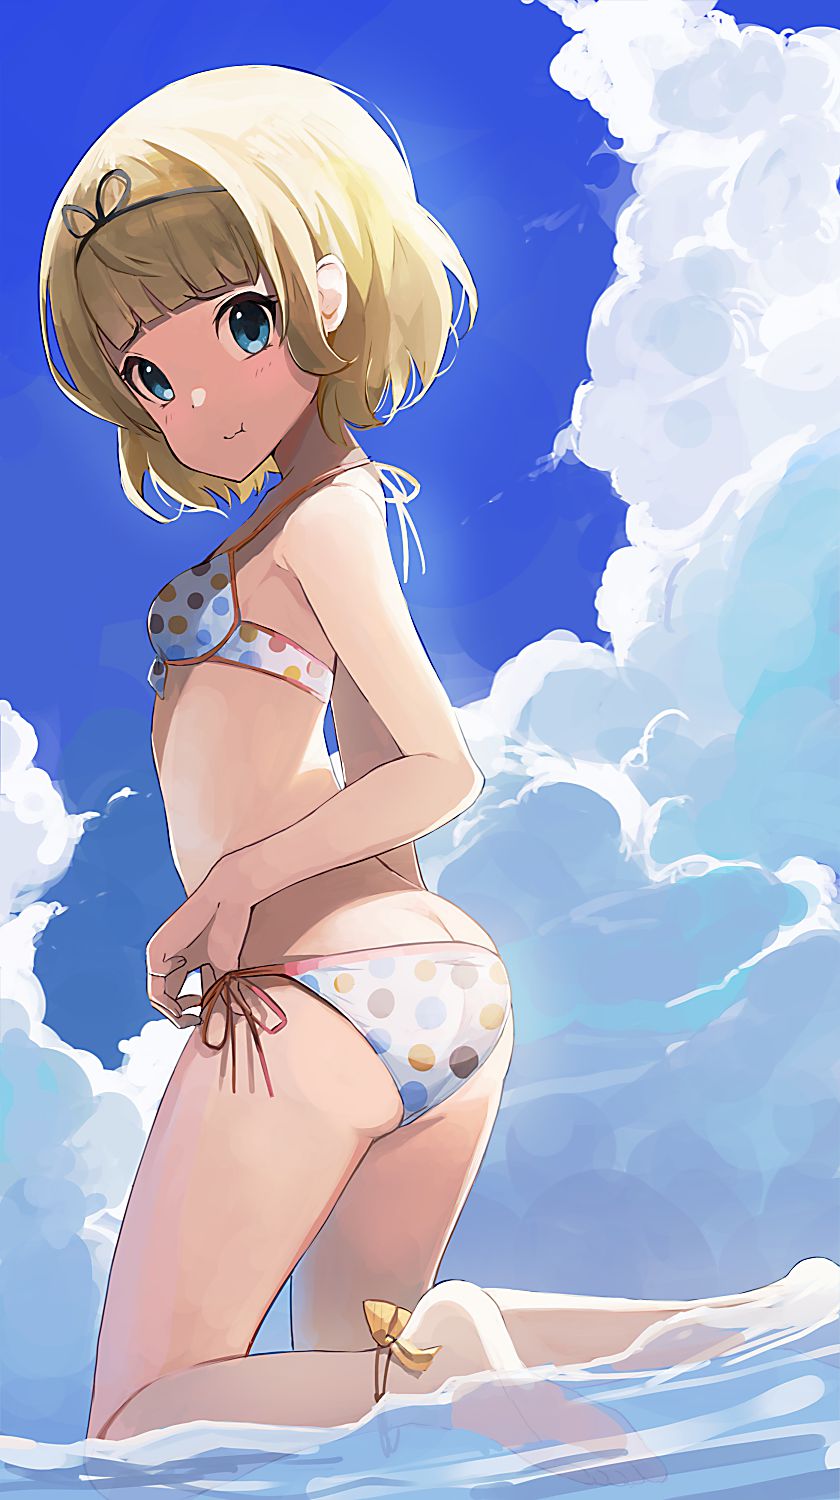 [131 pieces of intense selection] secondary image of a cute loli beautiful girl in a cute bikini or swimsuit 64